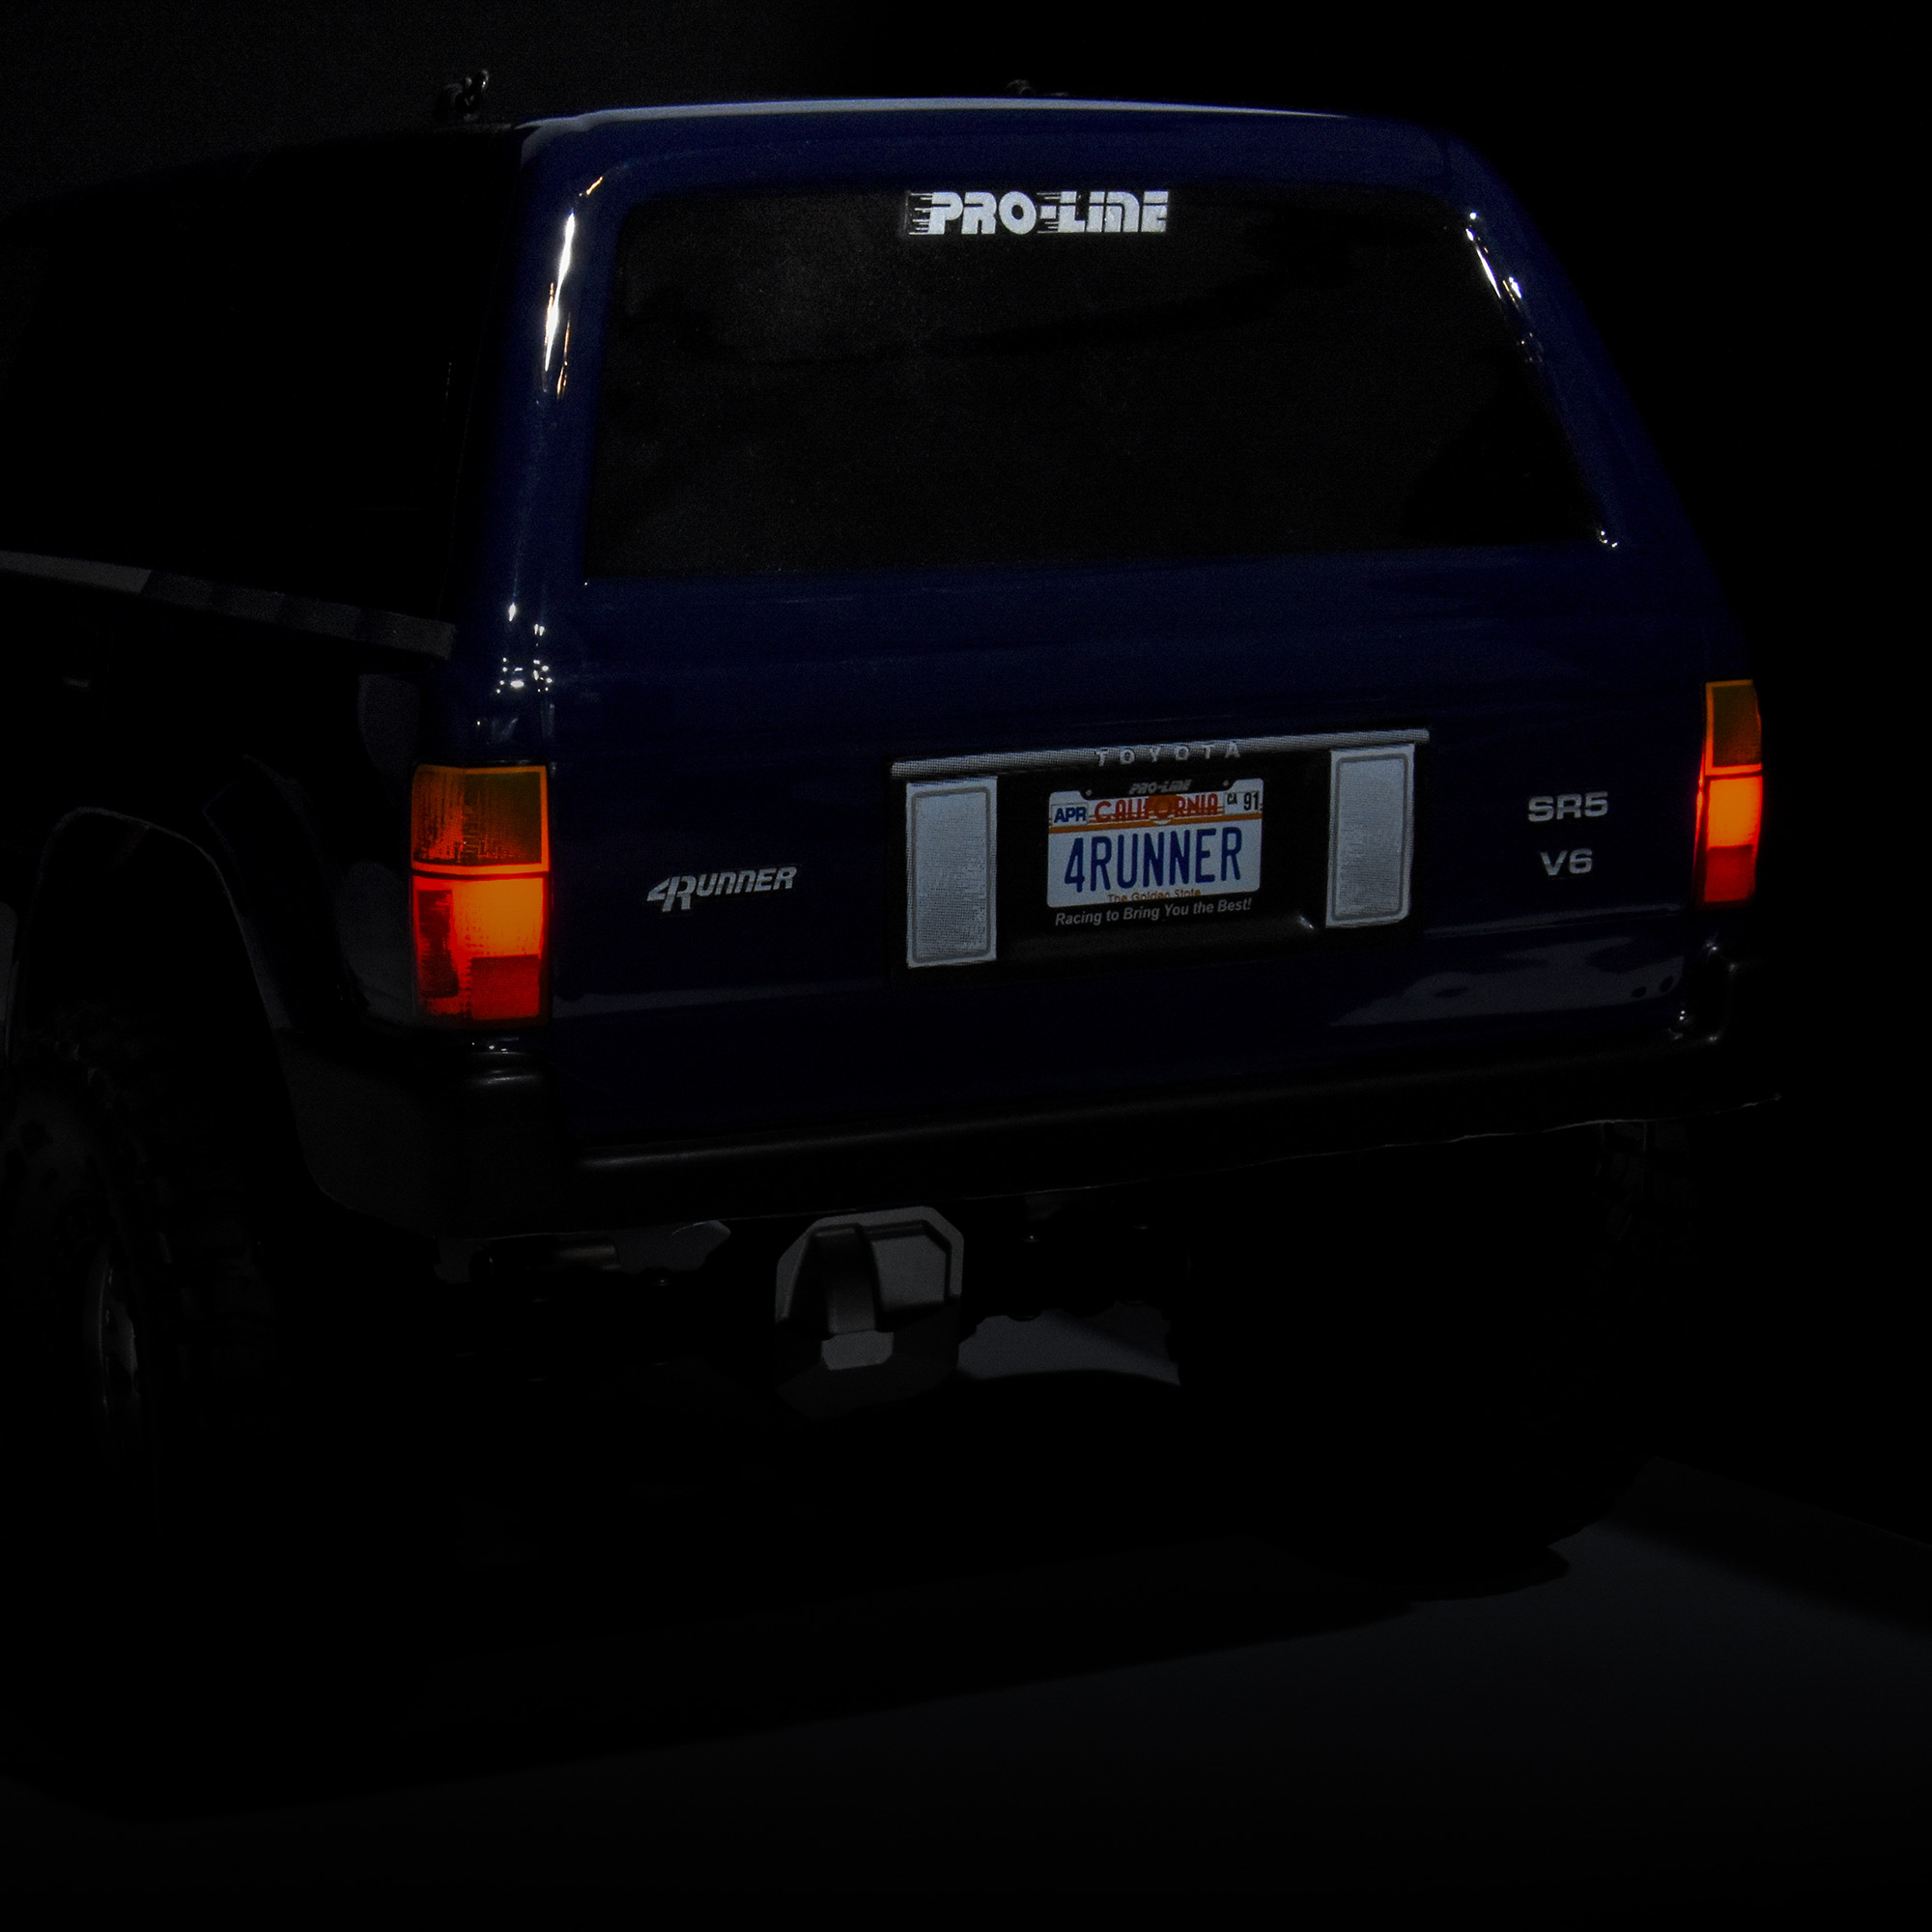 18 LED Light Kit - Premium Quality Genuine JPV2015 Product Ultra Bright Tail Lights 6 Ultra Bright Headlights & Handmade in USA exclusively by JPV2015 12 FITS LARGE 1:10 SCALE VEHICLES 